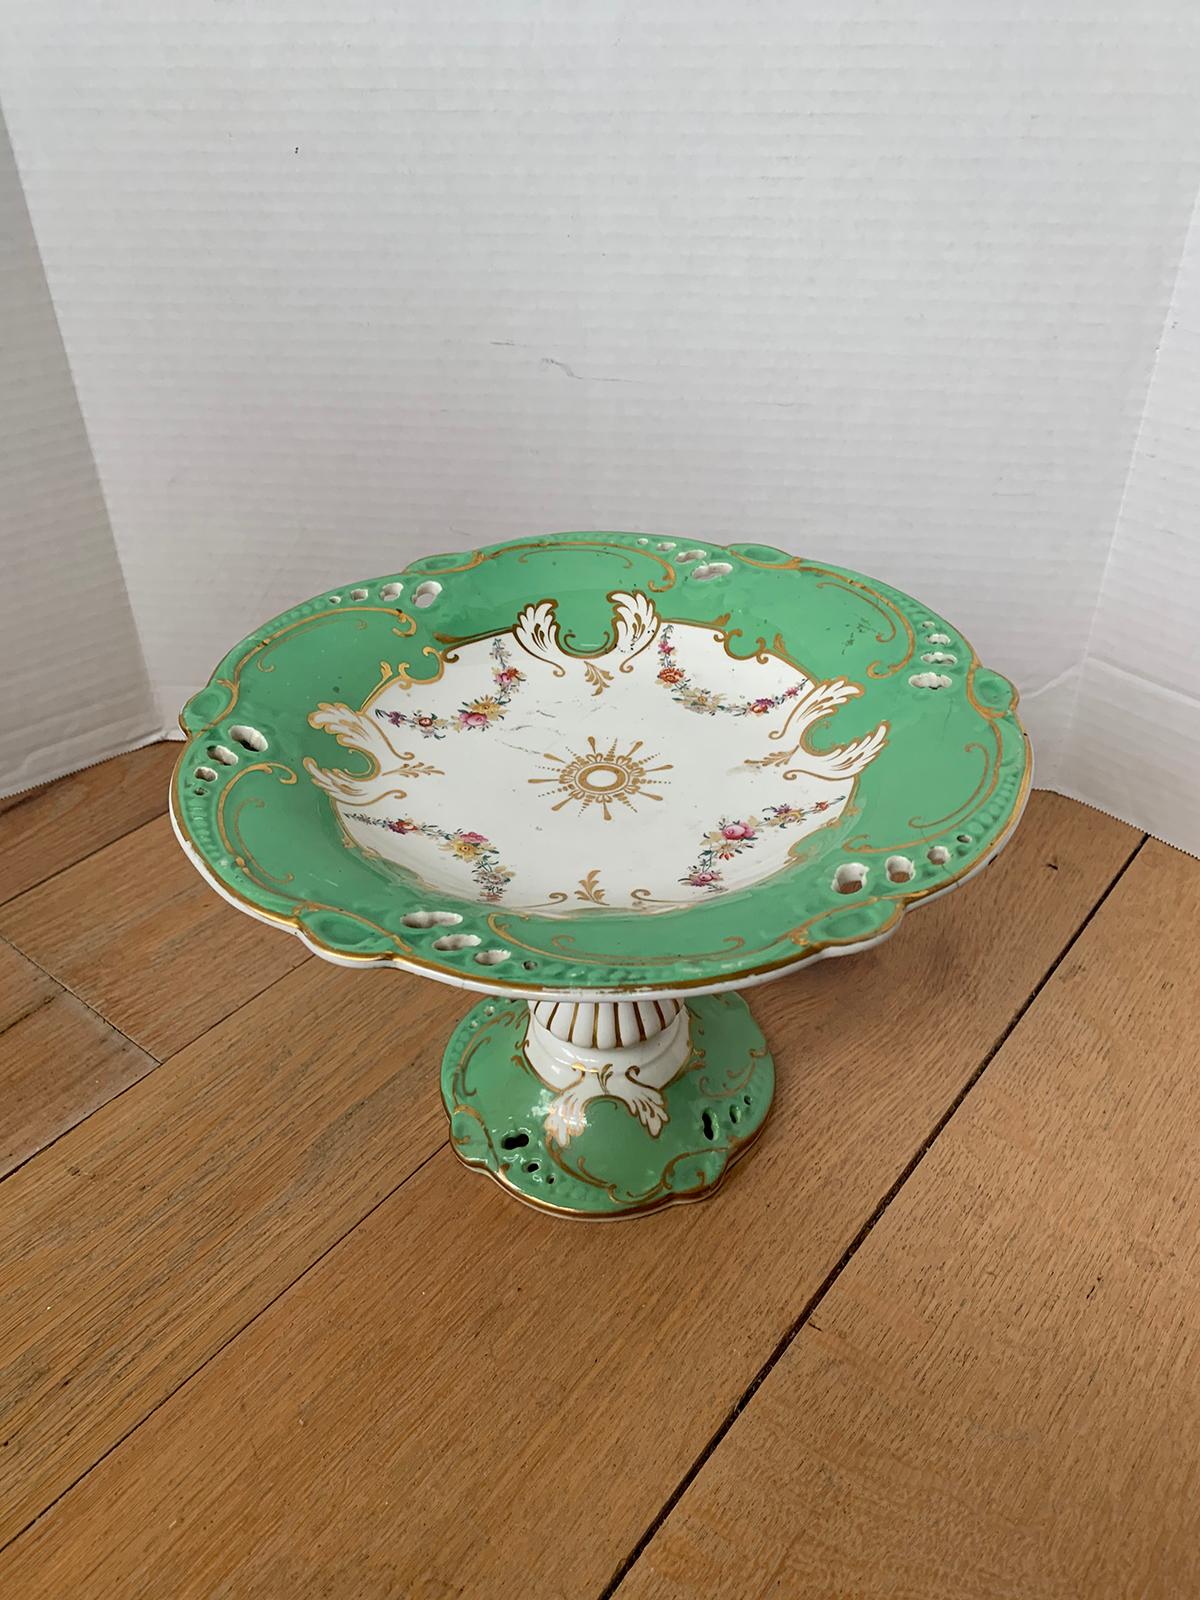 19th Century English Green & White Porcelain Compote with Gilt Details, Unmarked 11